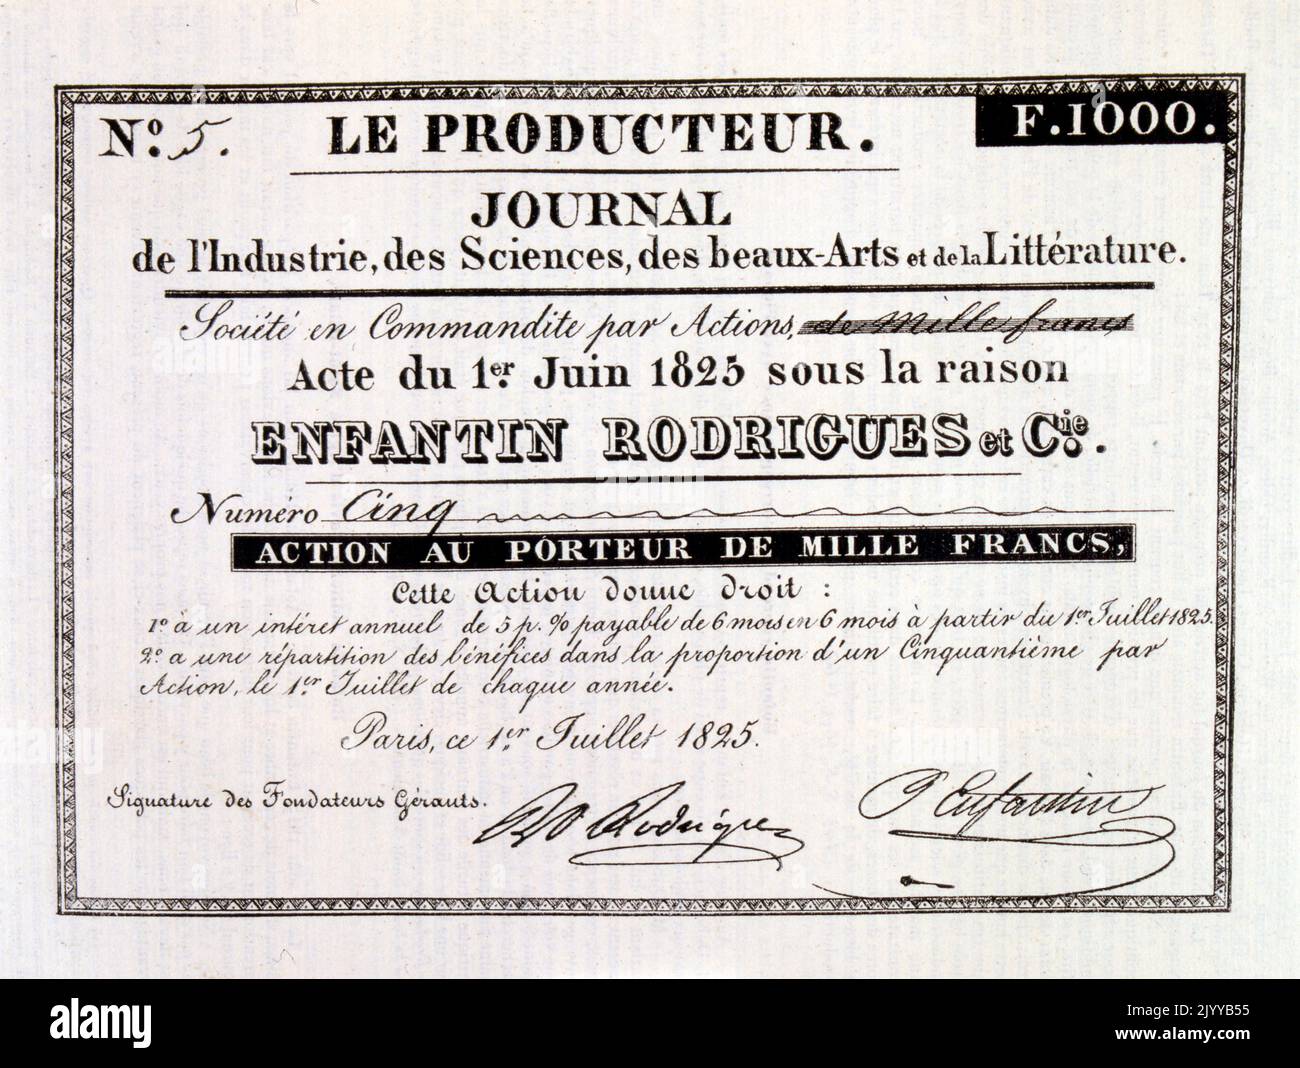 Black and white image of a certificate or bank note for 1000 francs dated 1 July 1825, issued by the Journal of Industry, the Sciences, the Fine Arts and Literature. Stock Photo